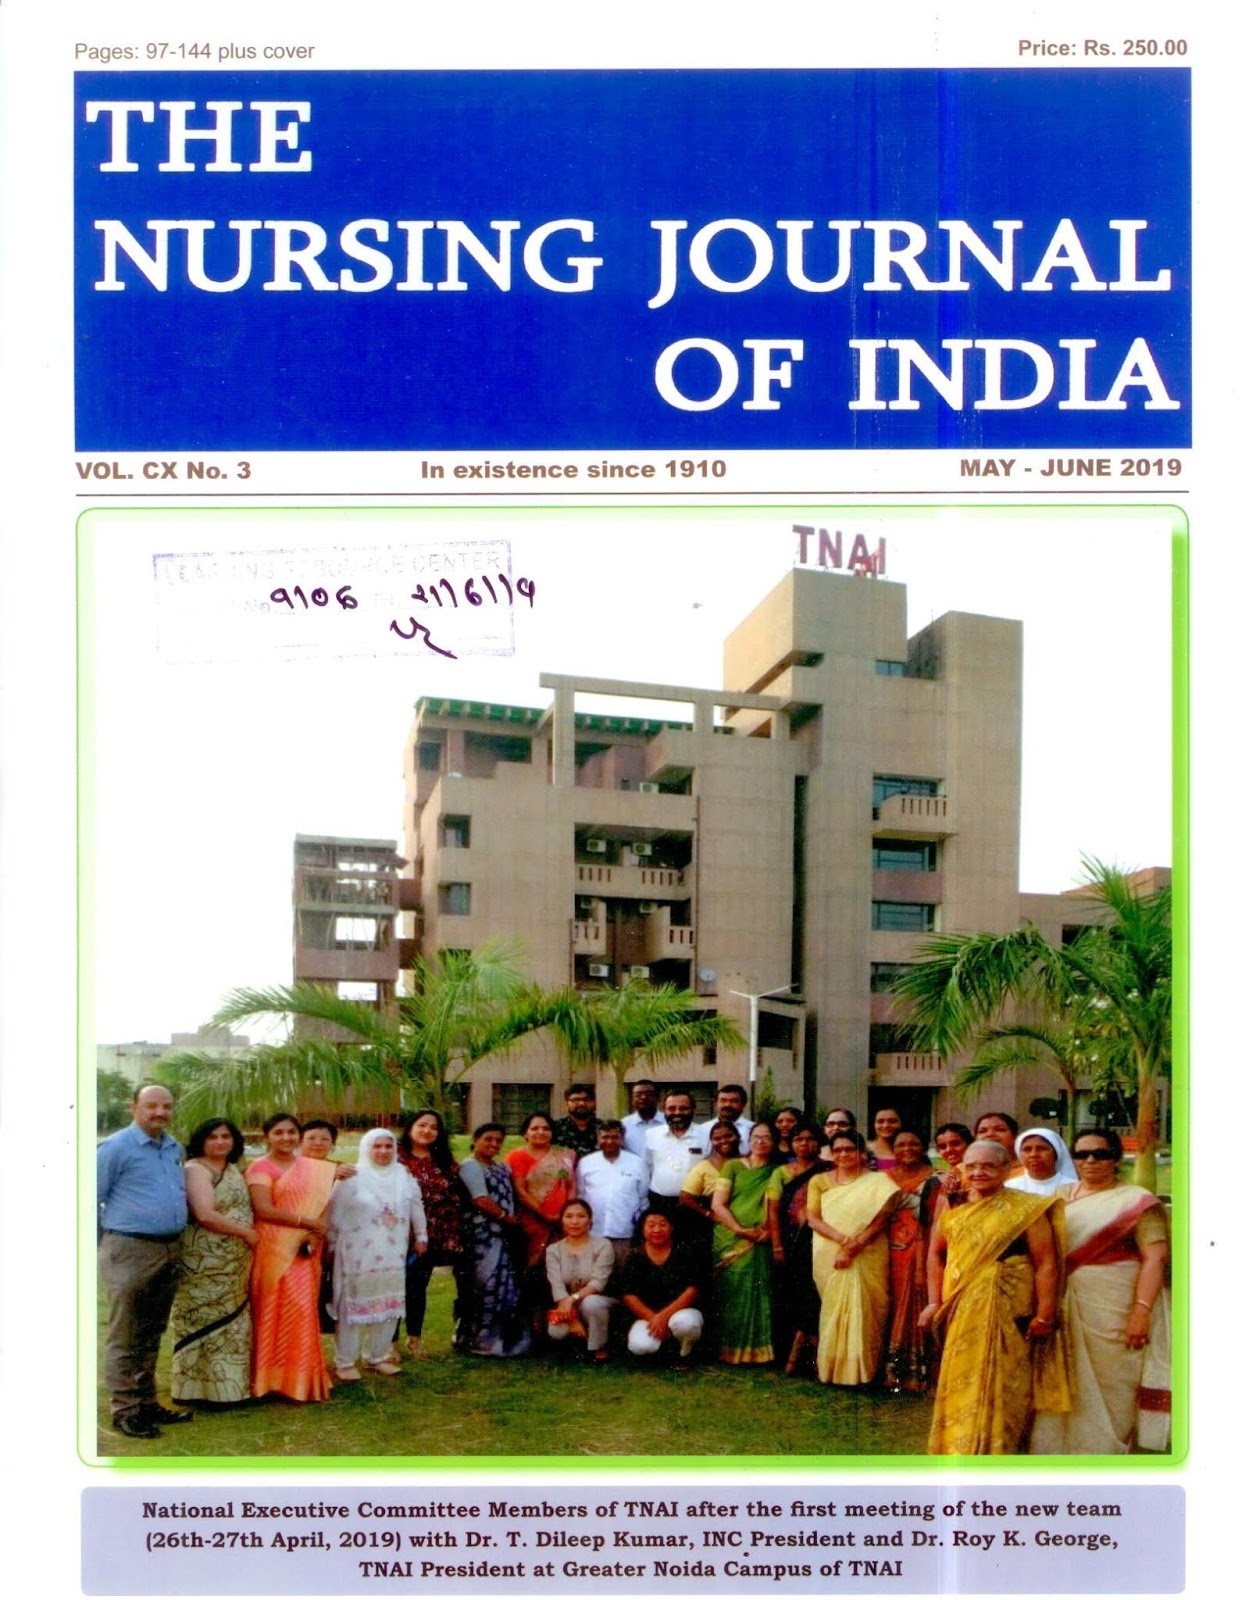 http://www.tnaionline.org/cms/newsimages/file/journal/content.pdf